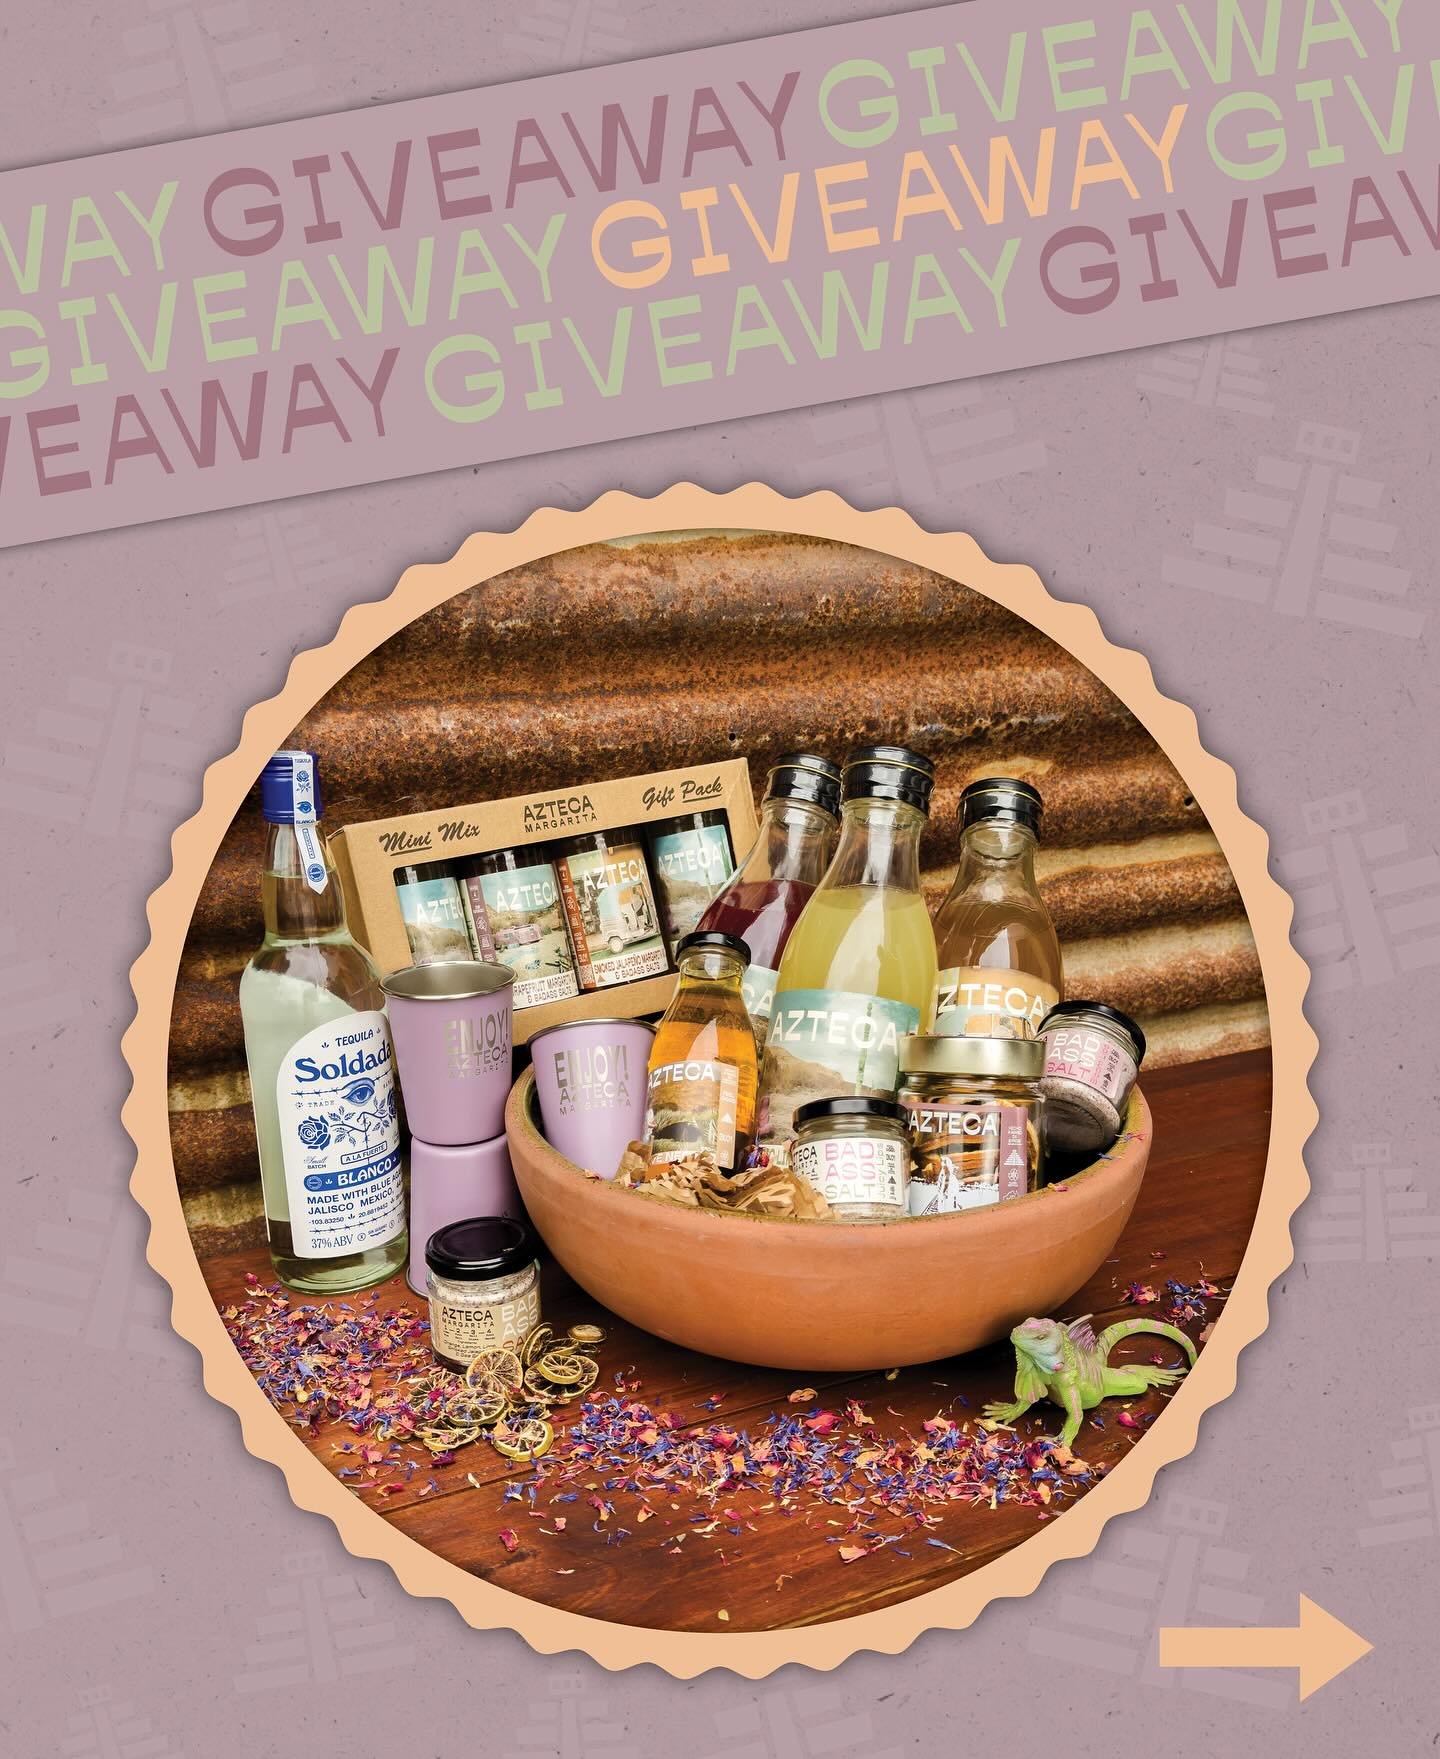 Let&rsquo;s celebrate all the Ma&rsquo;s!! Or Pa&rsquo;s out there!! 

⚡️Cheeky little giveaway⚡️

How to Enter 

1. Follow @aztecamargarita 
2. ���Like &amp; Save this post
3. ���Tag your friends in the comments ~ the more tags, the more entries!
4.